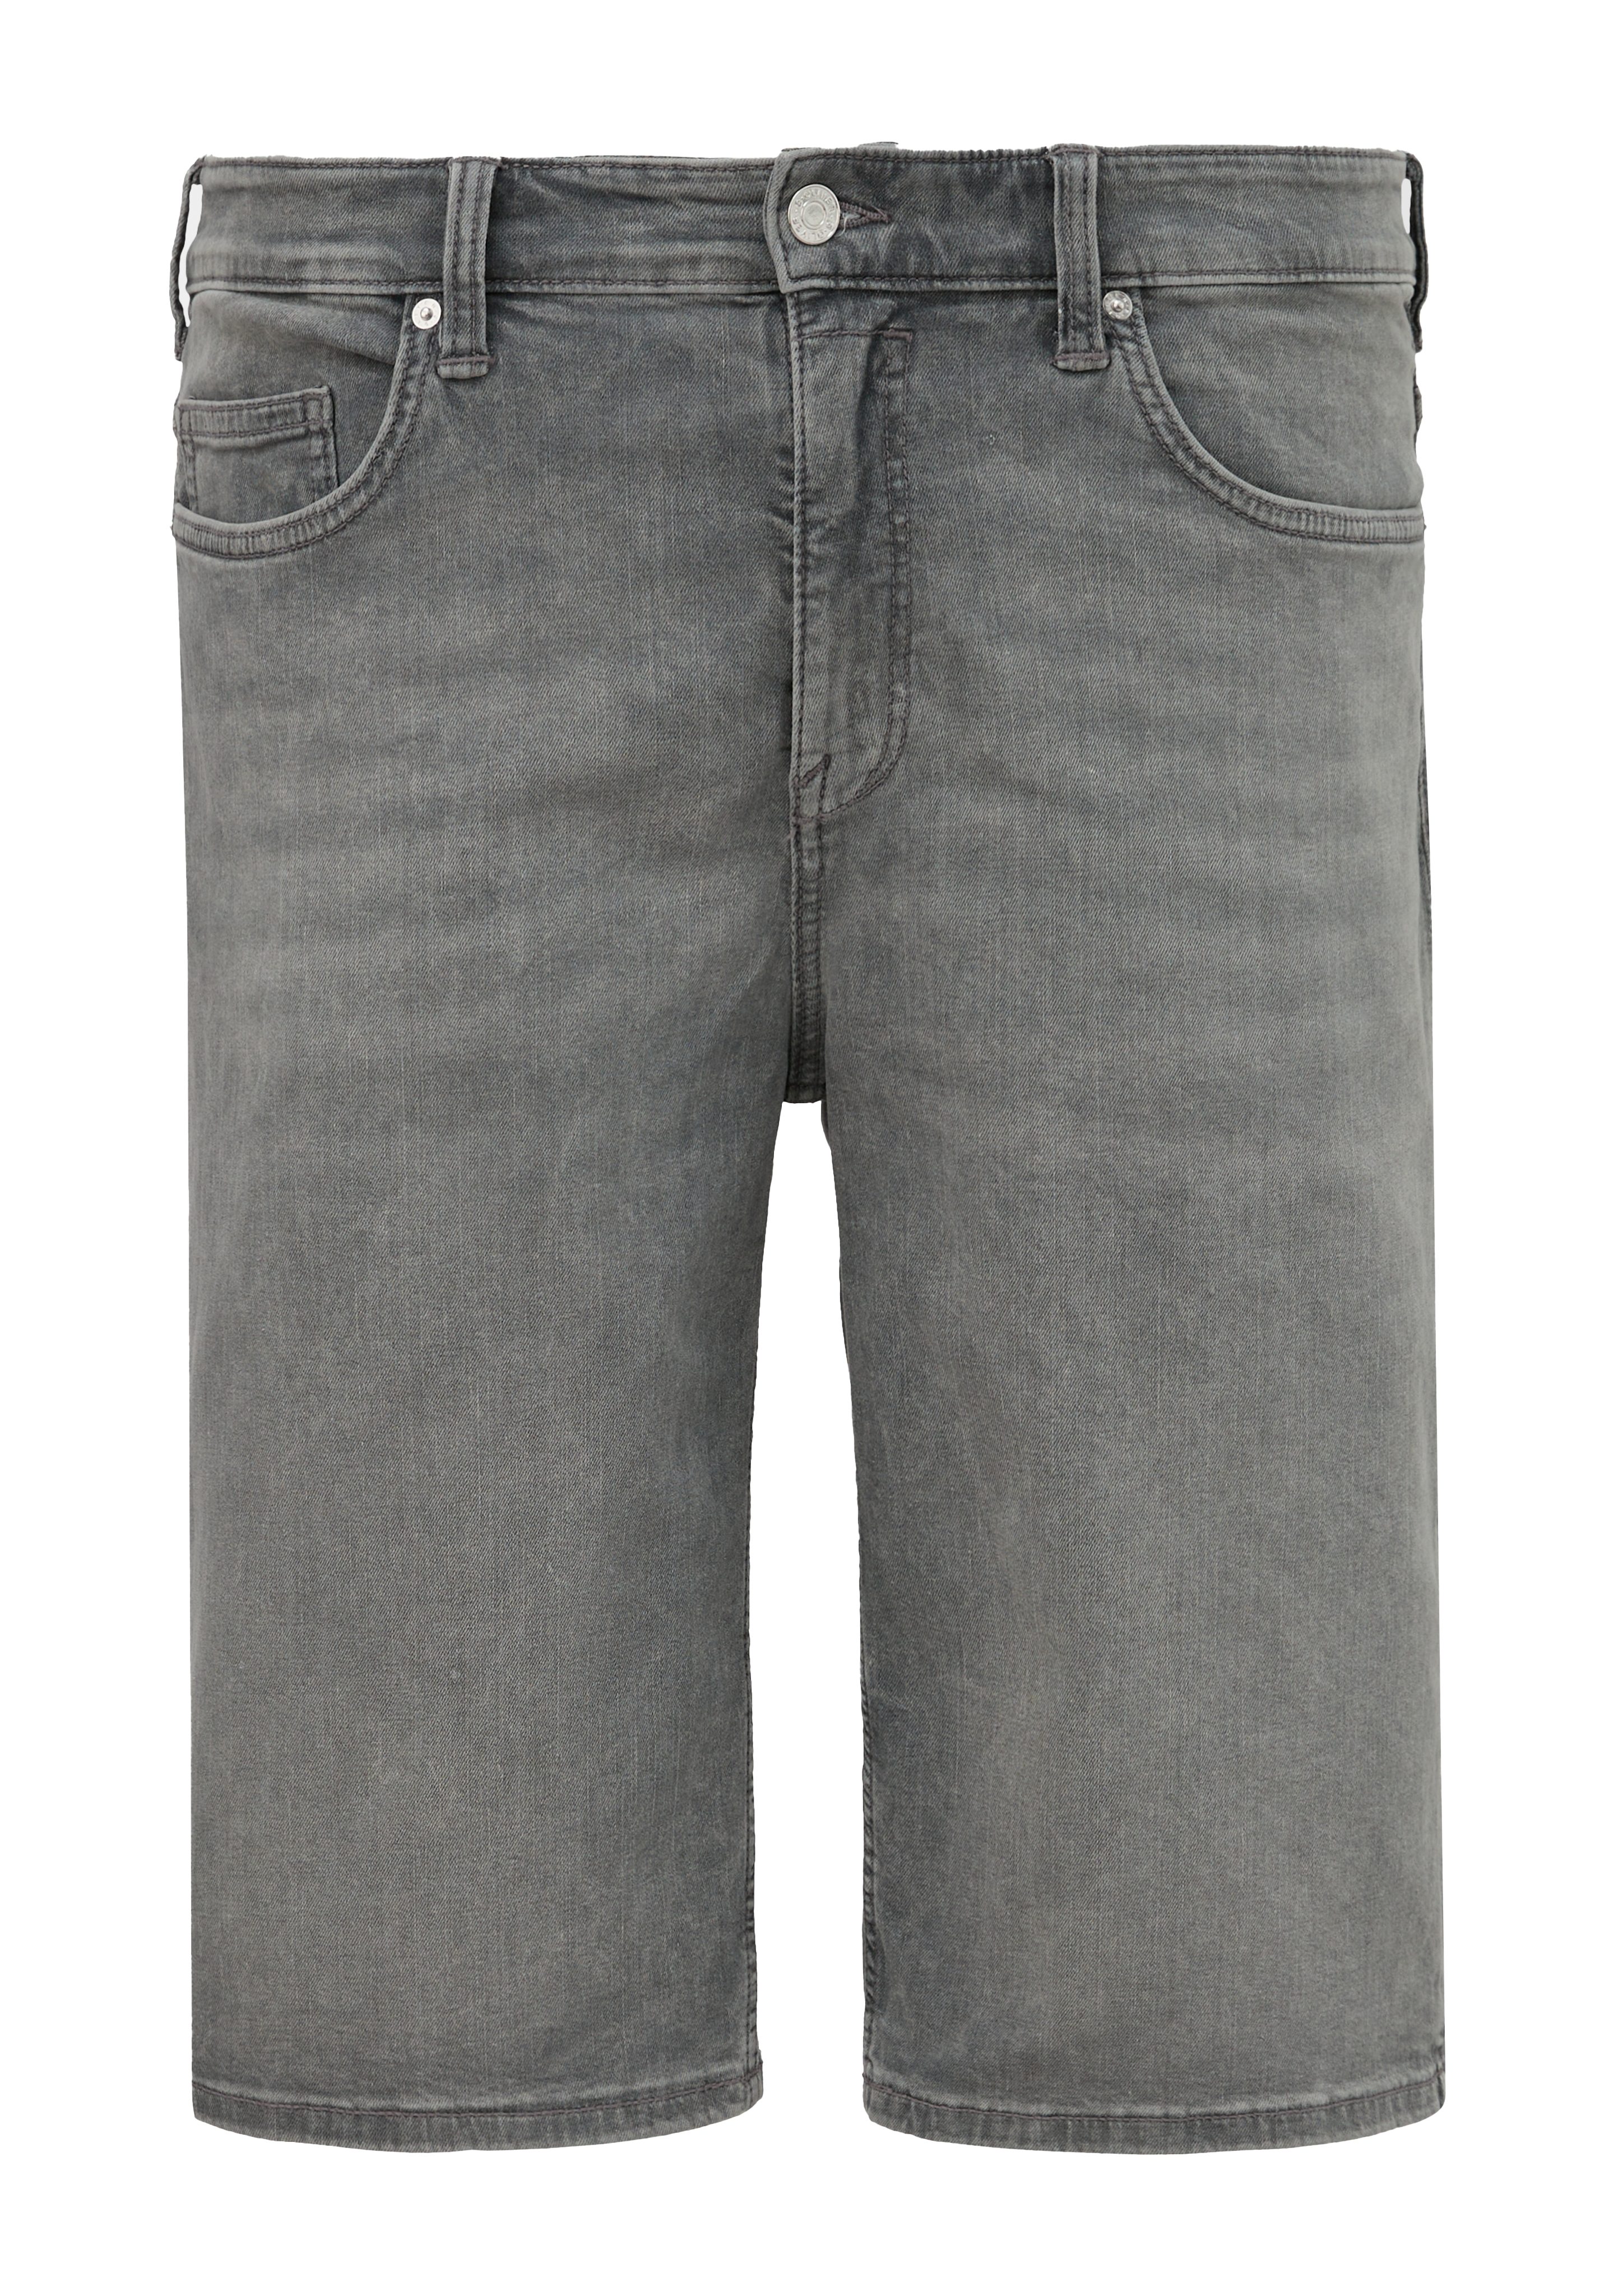 s.Oliver Jeansshorts Jeans-Bermuda Casby / / Fit steingrau Relaxed Straight Mid Rise Waschung / Leg